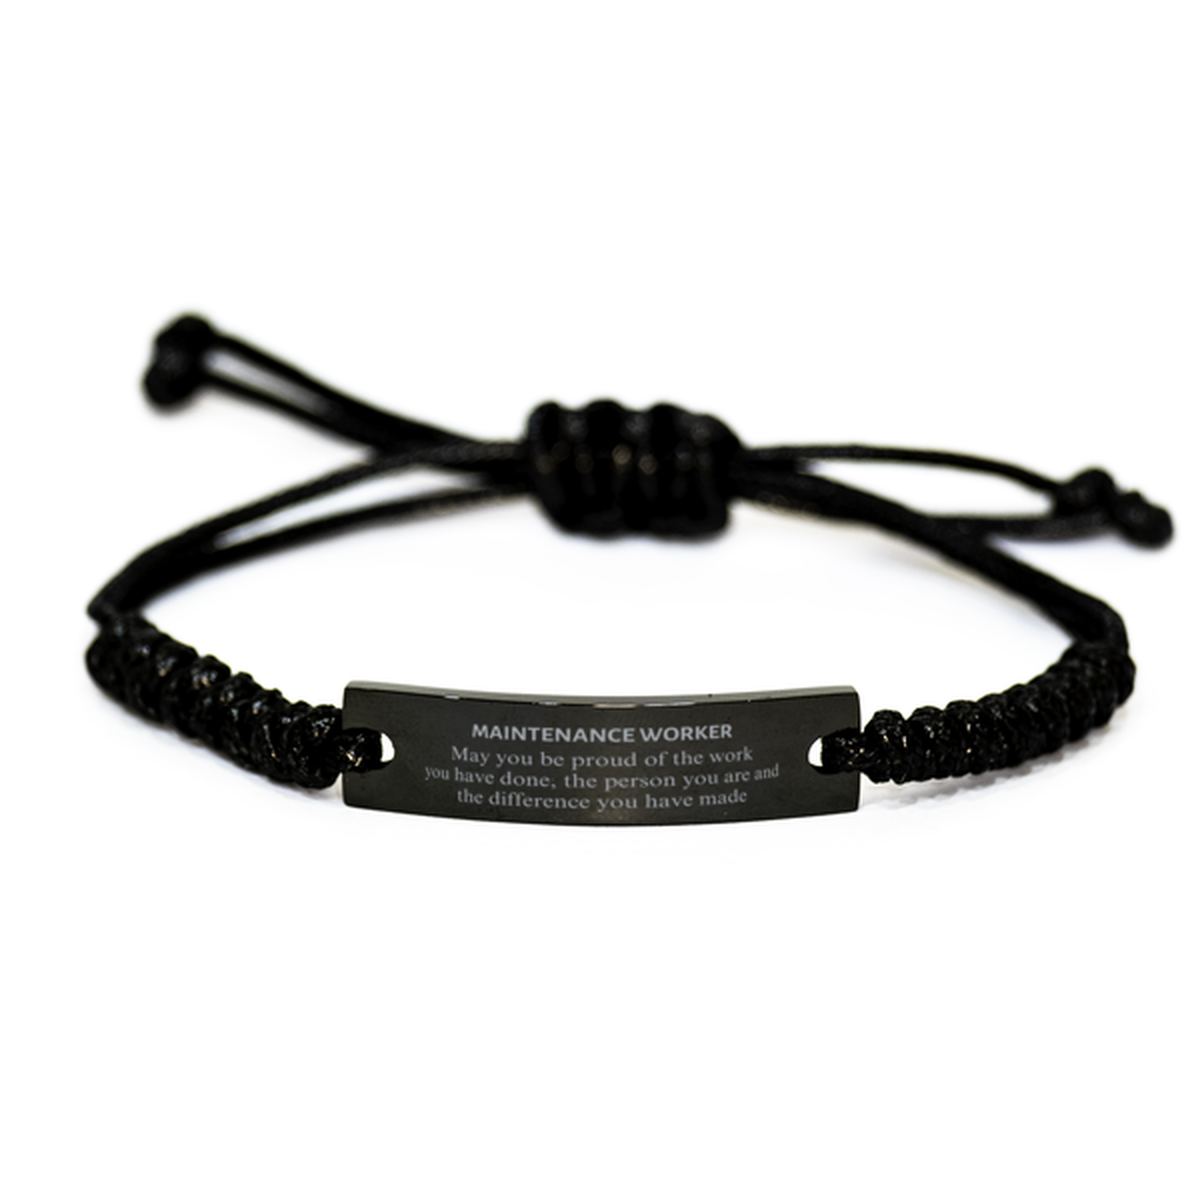 Maintenance Worker May you be proud of the work you have done, Retirement Maintenance Worker Black Rope Bracelet for Colleague Appreciation Gifts Amazing for Maintenance Worker